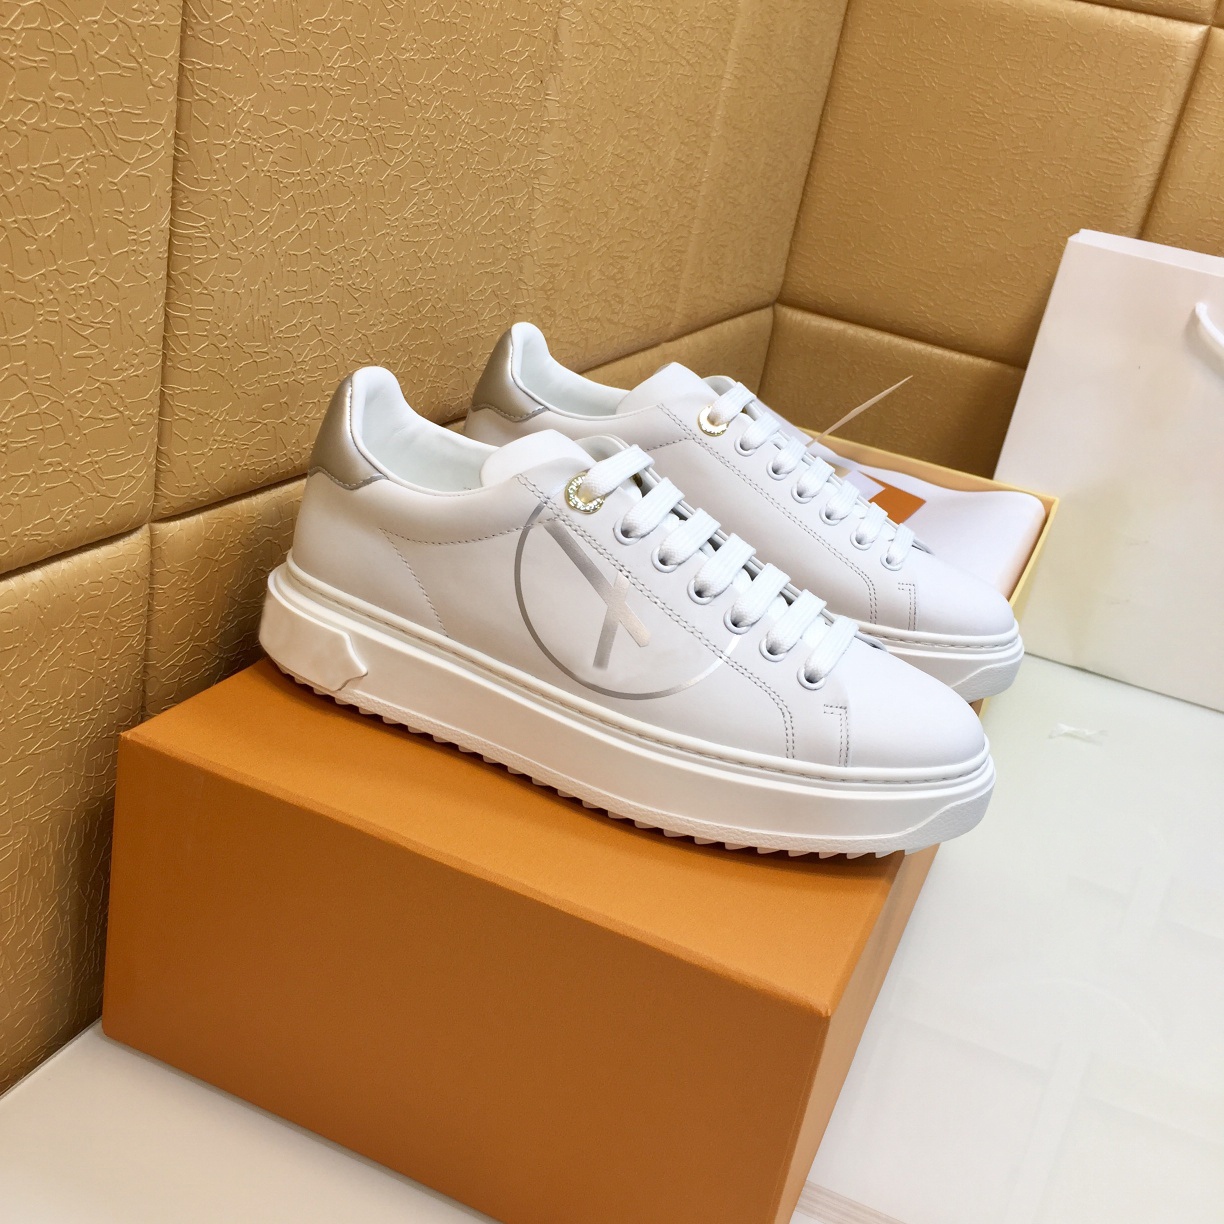 

2021 Designer Luxury TimeOut Sneakers Women Casual Shoes Lady Embossed Lambskin Calfskin White Pad Pattern Sole Shoe Retro Style Fashionable Top Quality Size 35-41, Color 15